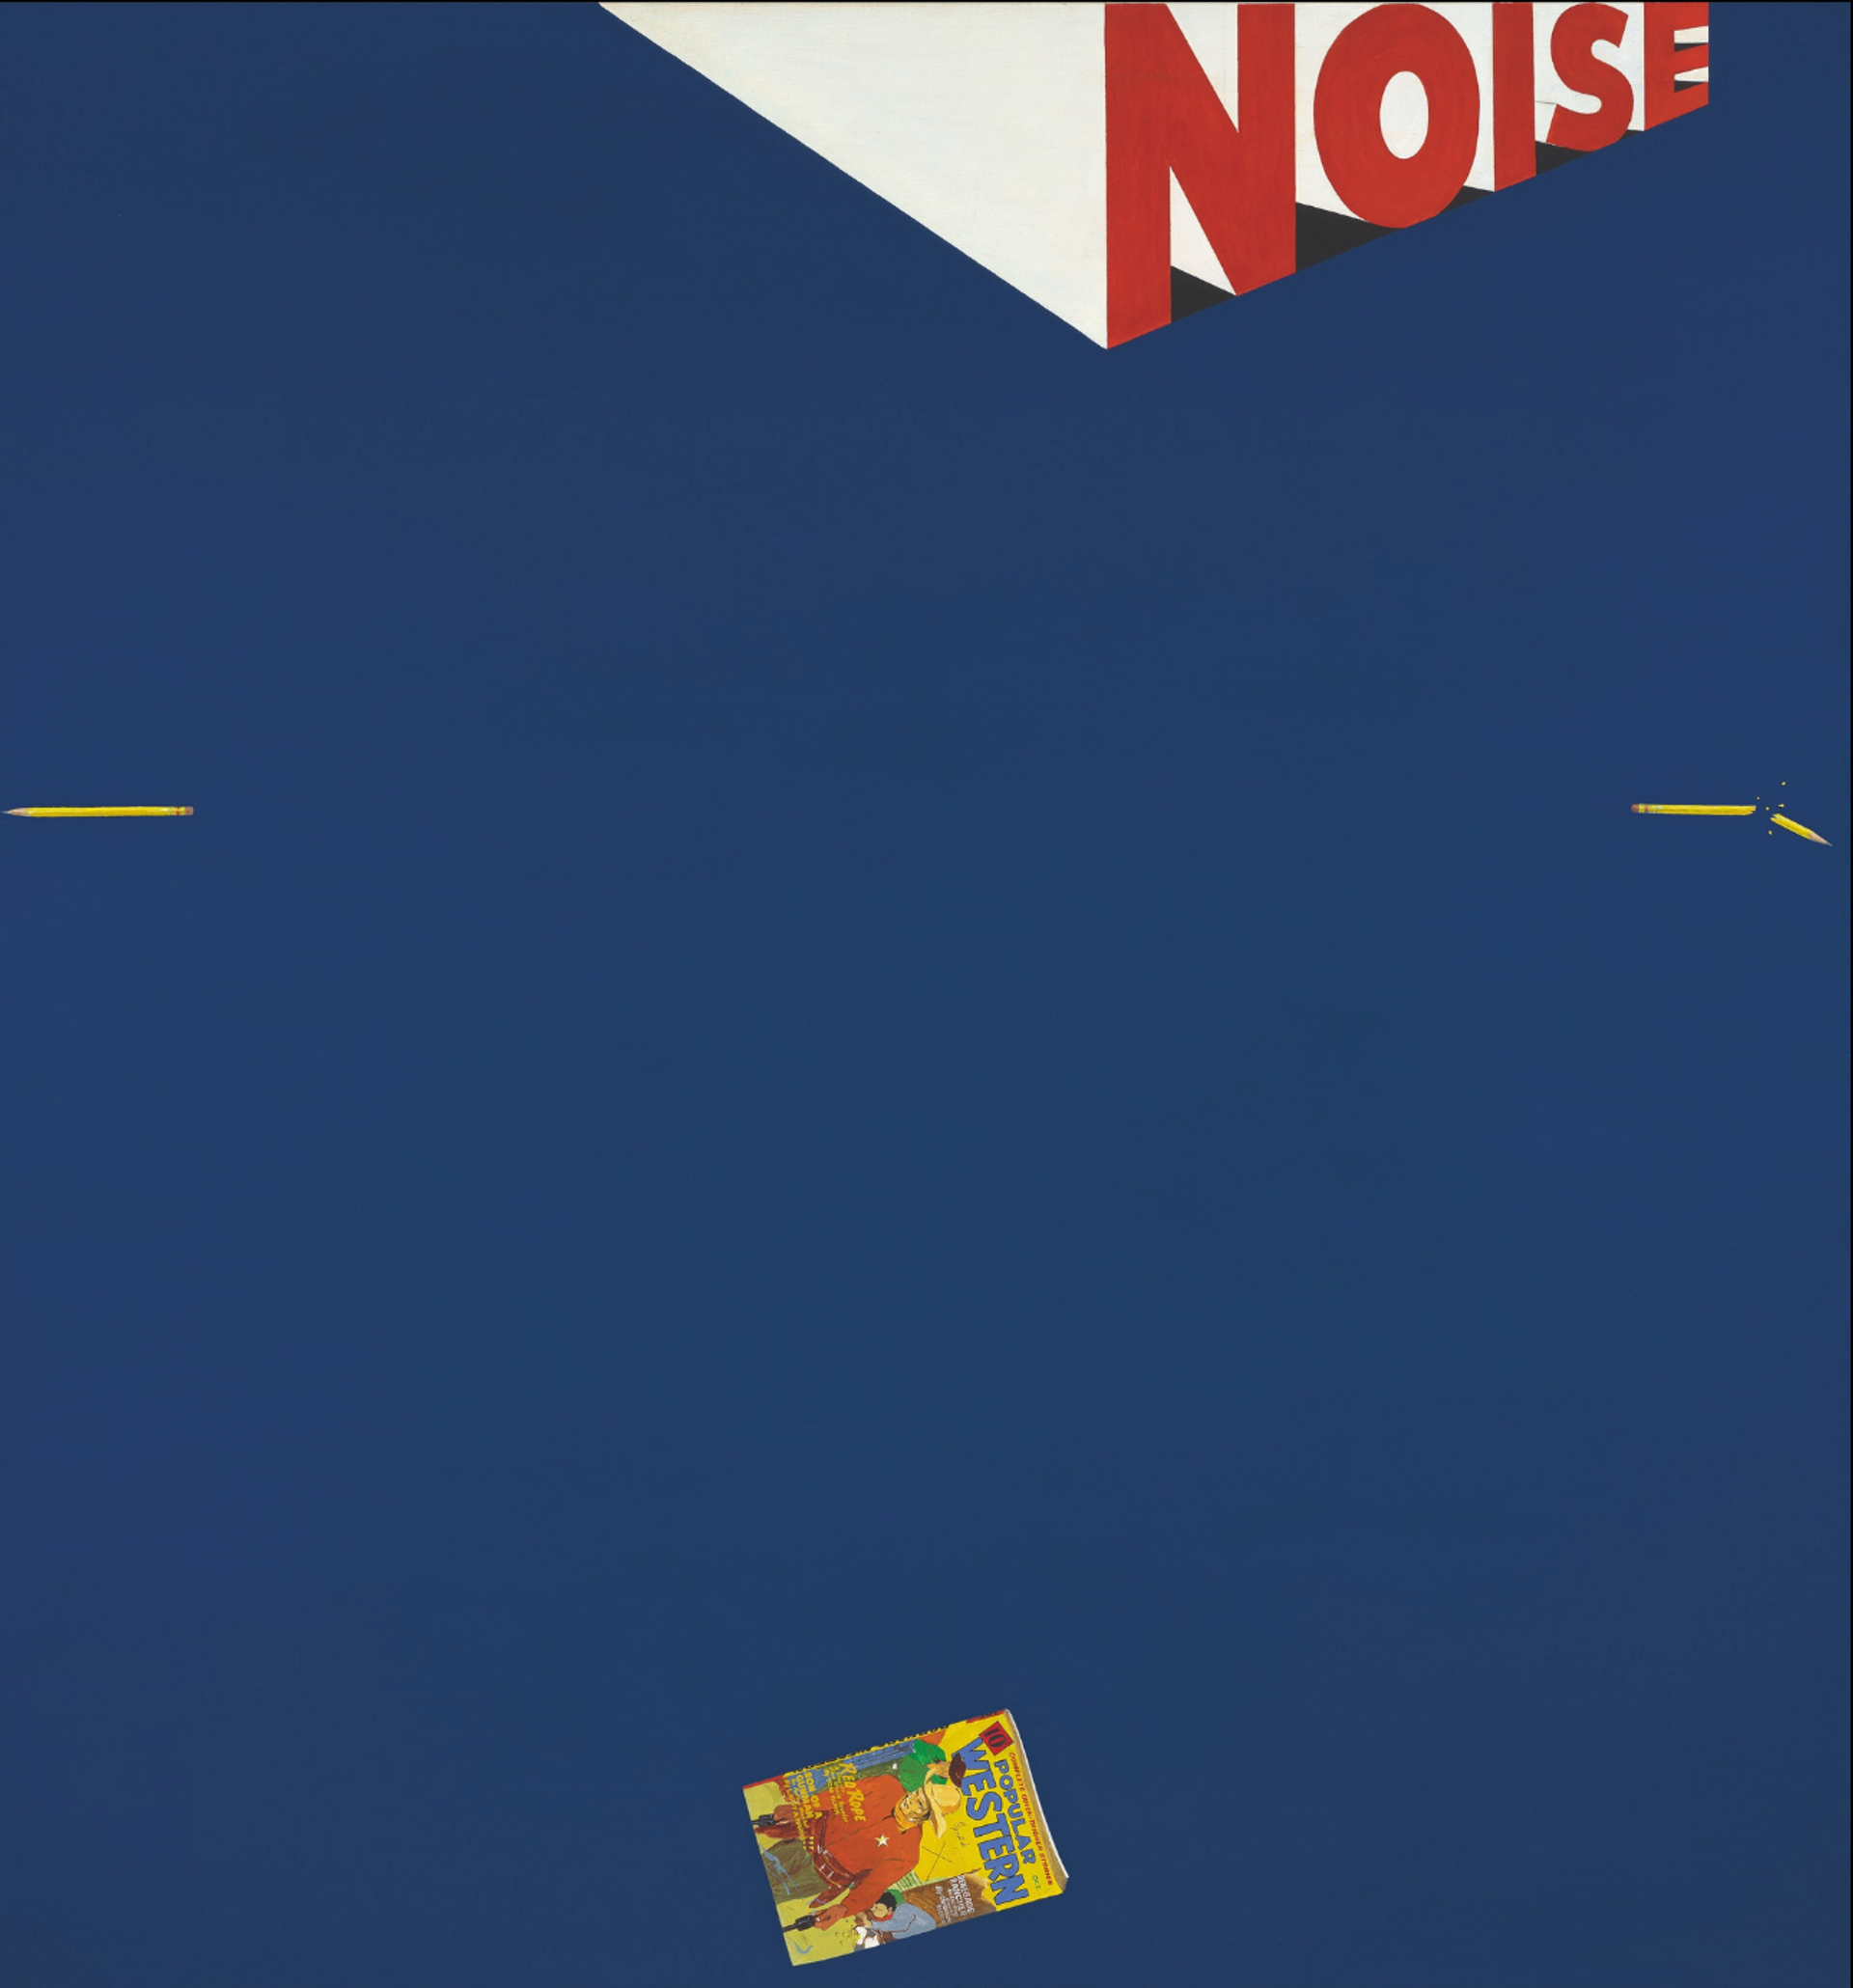 Painting by Ed Ruscha depicting the word noise in red, two yellow pencils, one in tacts and one broken, and a Western magazine, all set against a navy blue flat background.